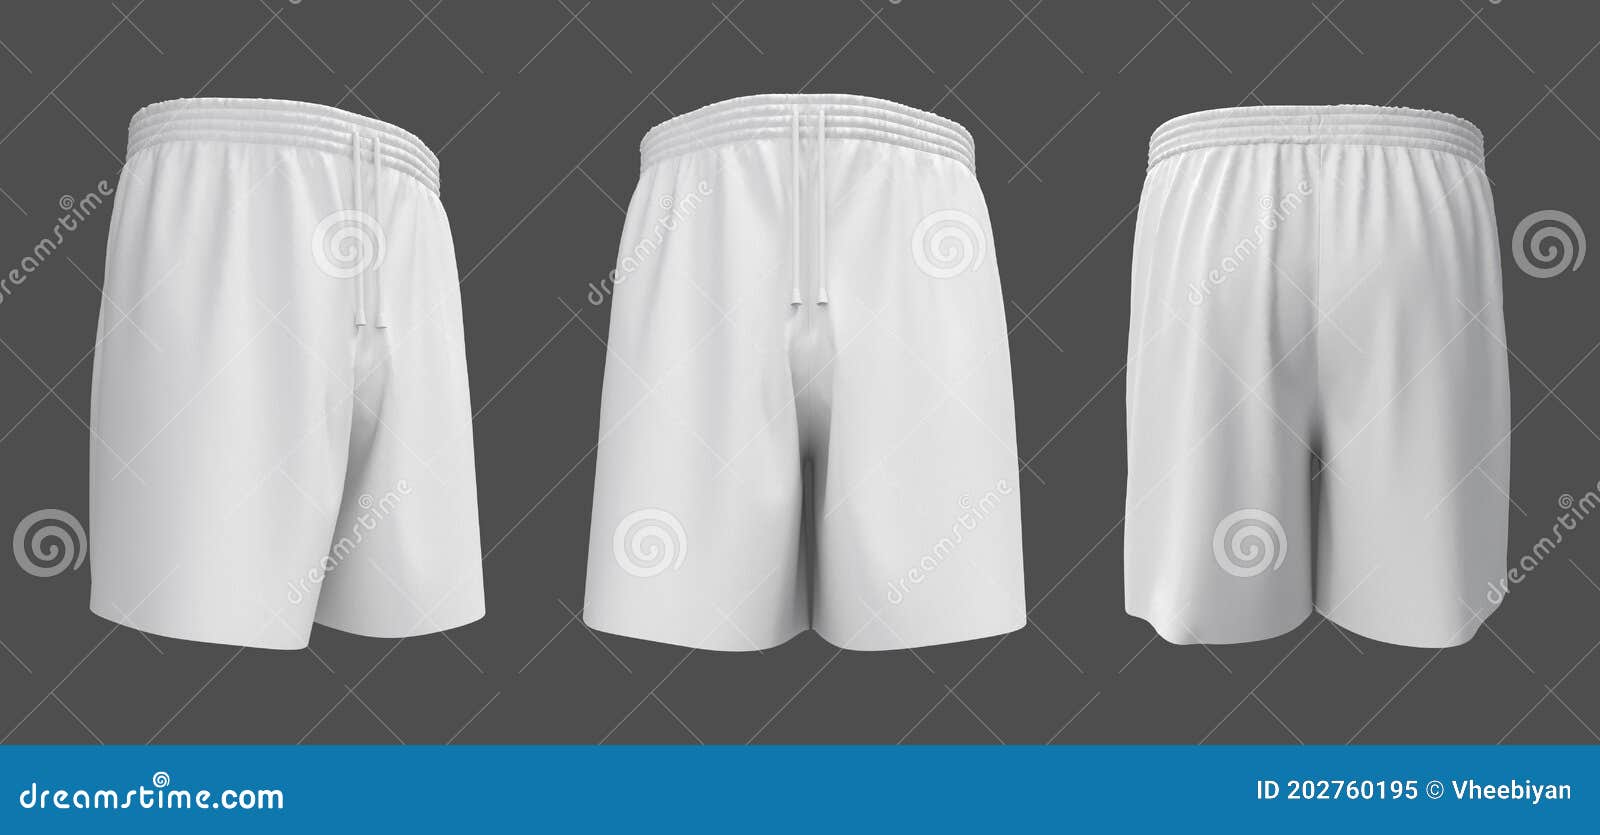 Download Blank Shorts Mockup, Front, Back And Side Views Stock ...